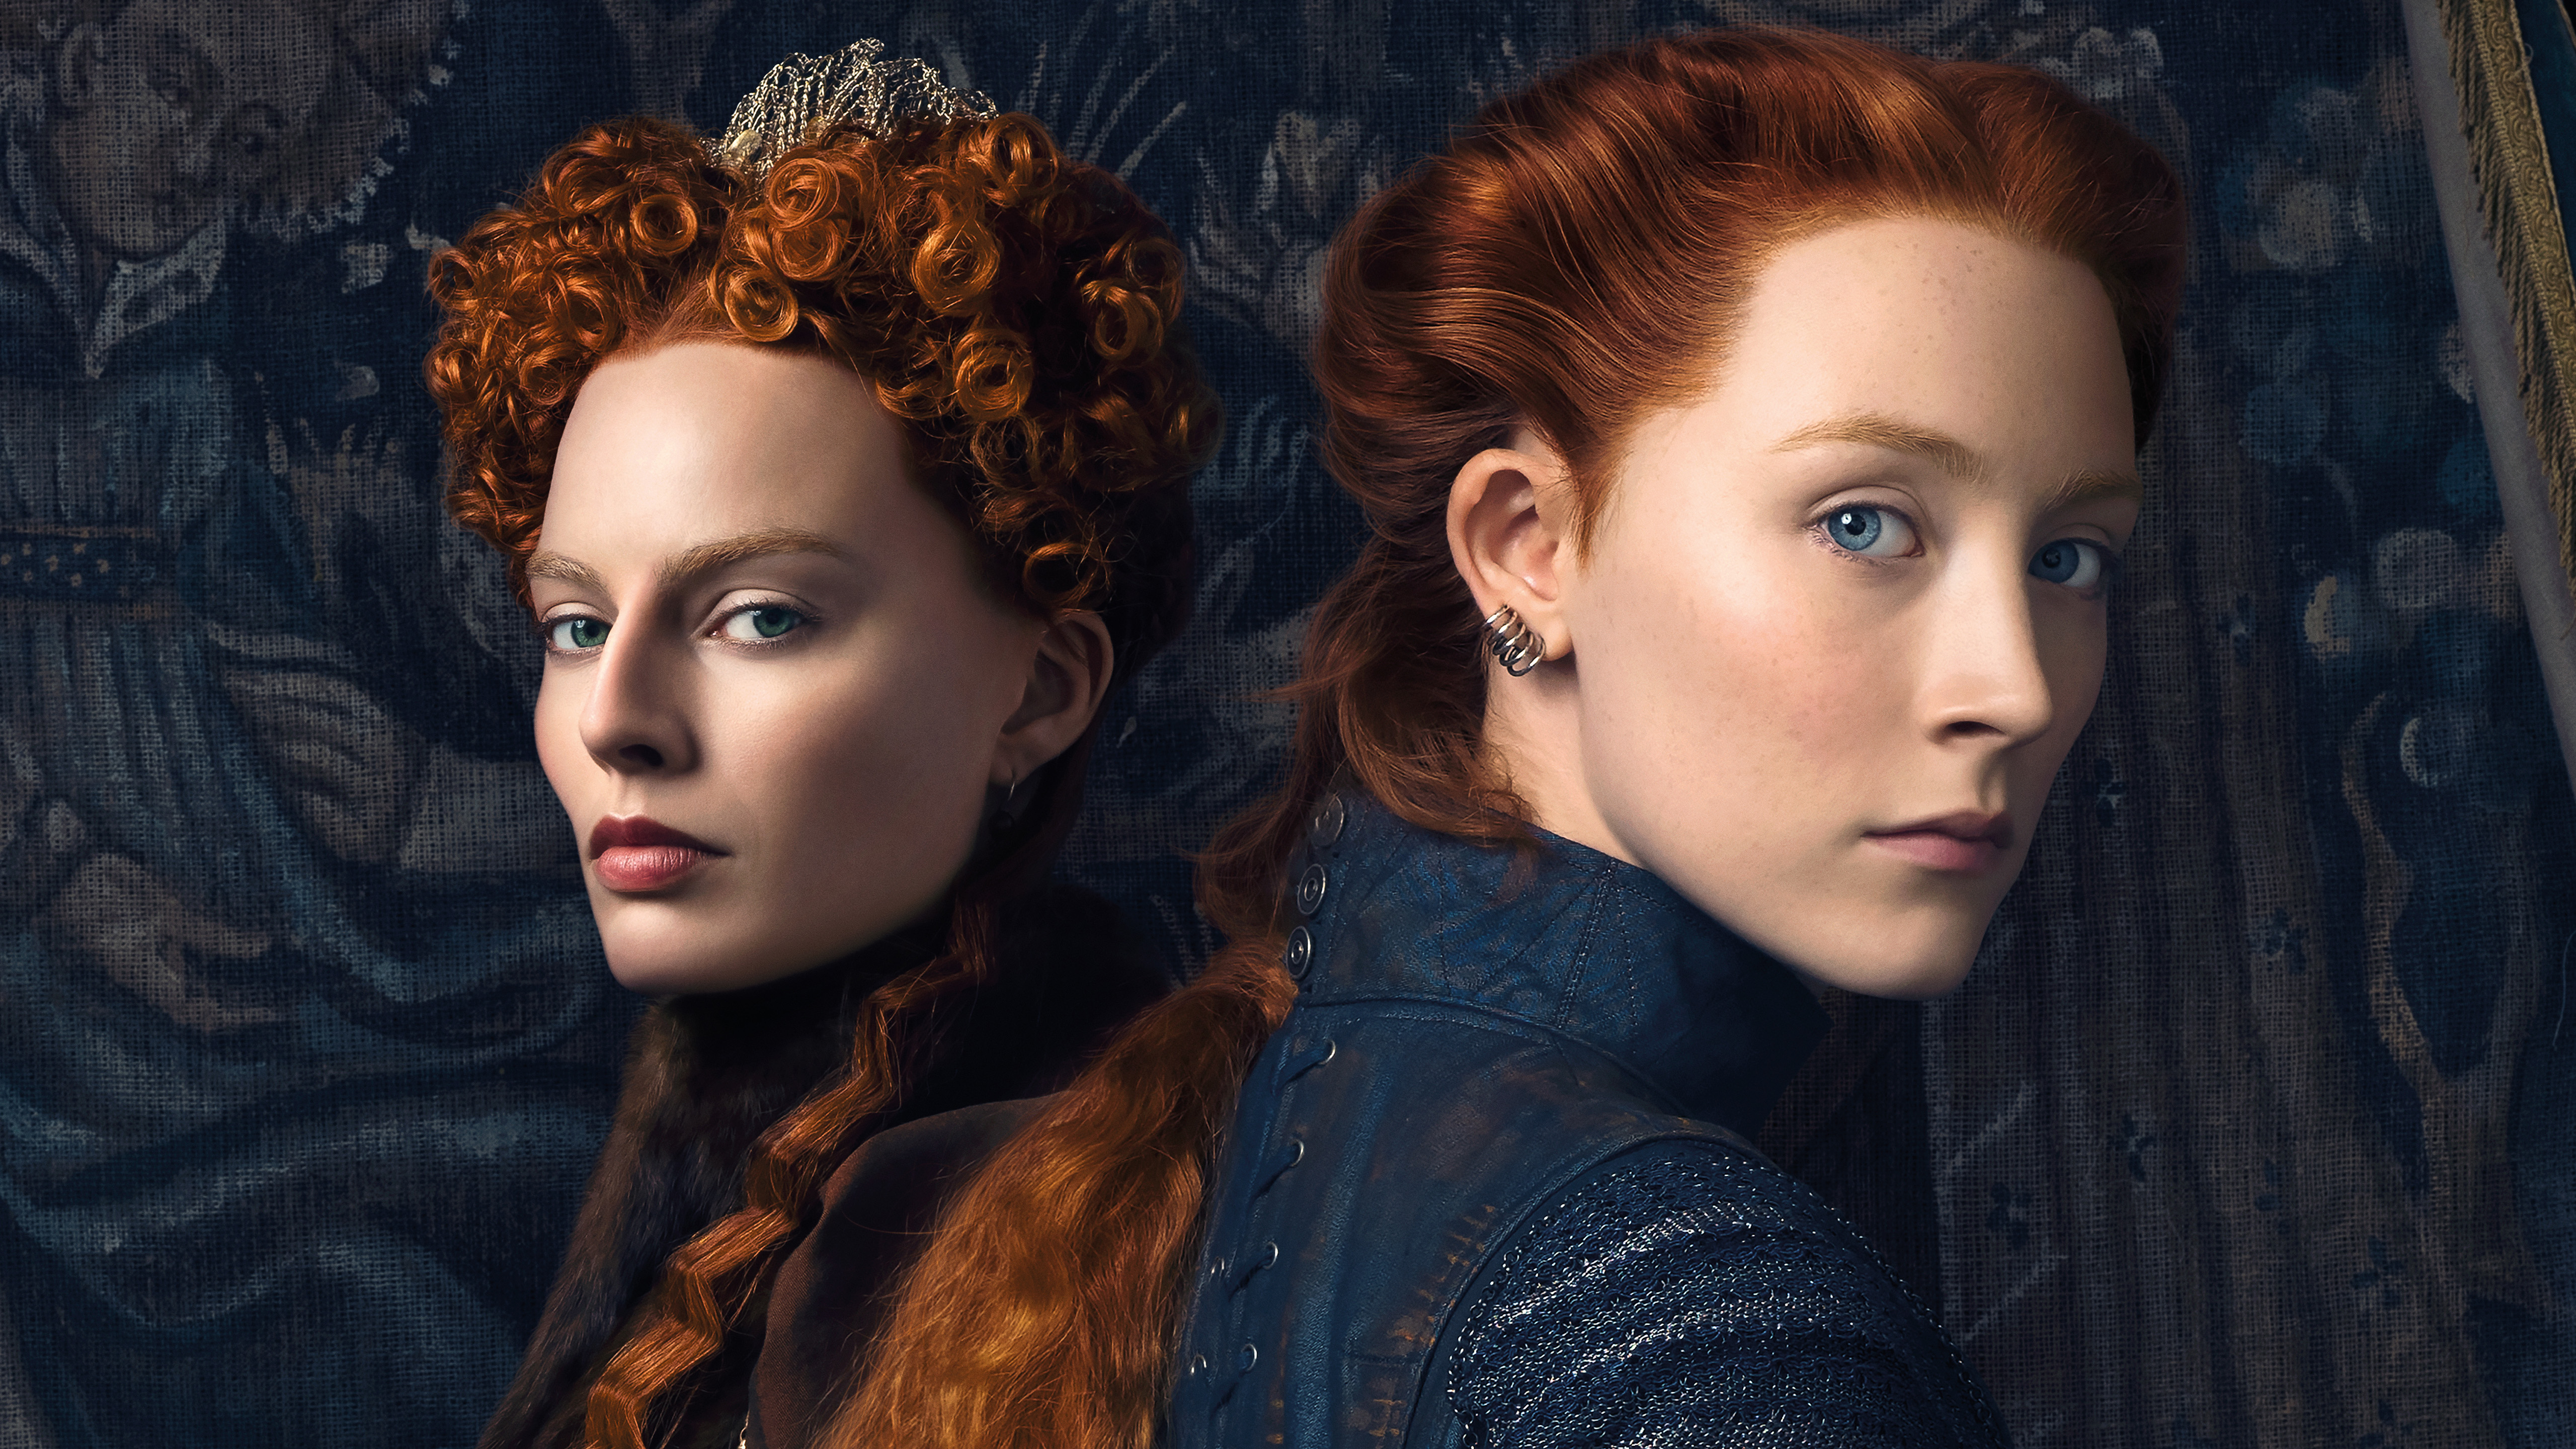 Mary Queen of Scots 2018 Movie 5K Wallpapers